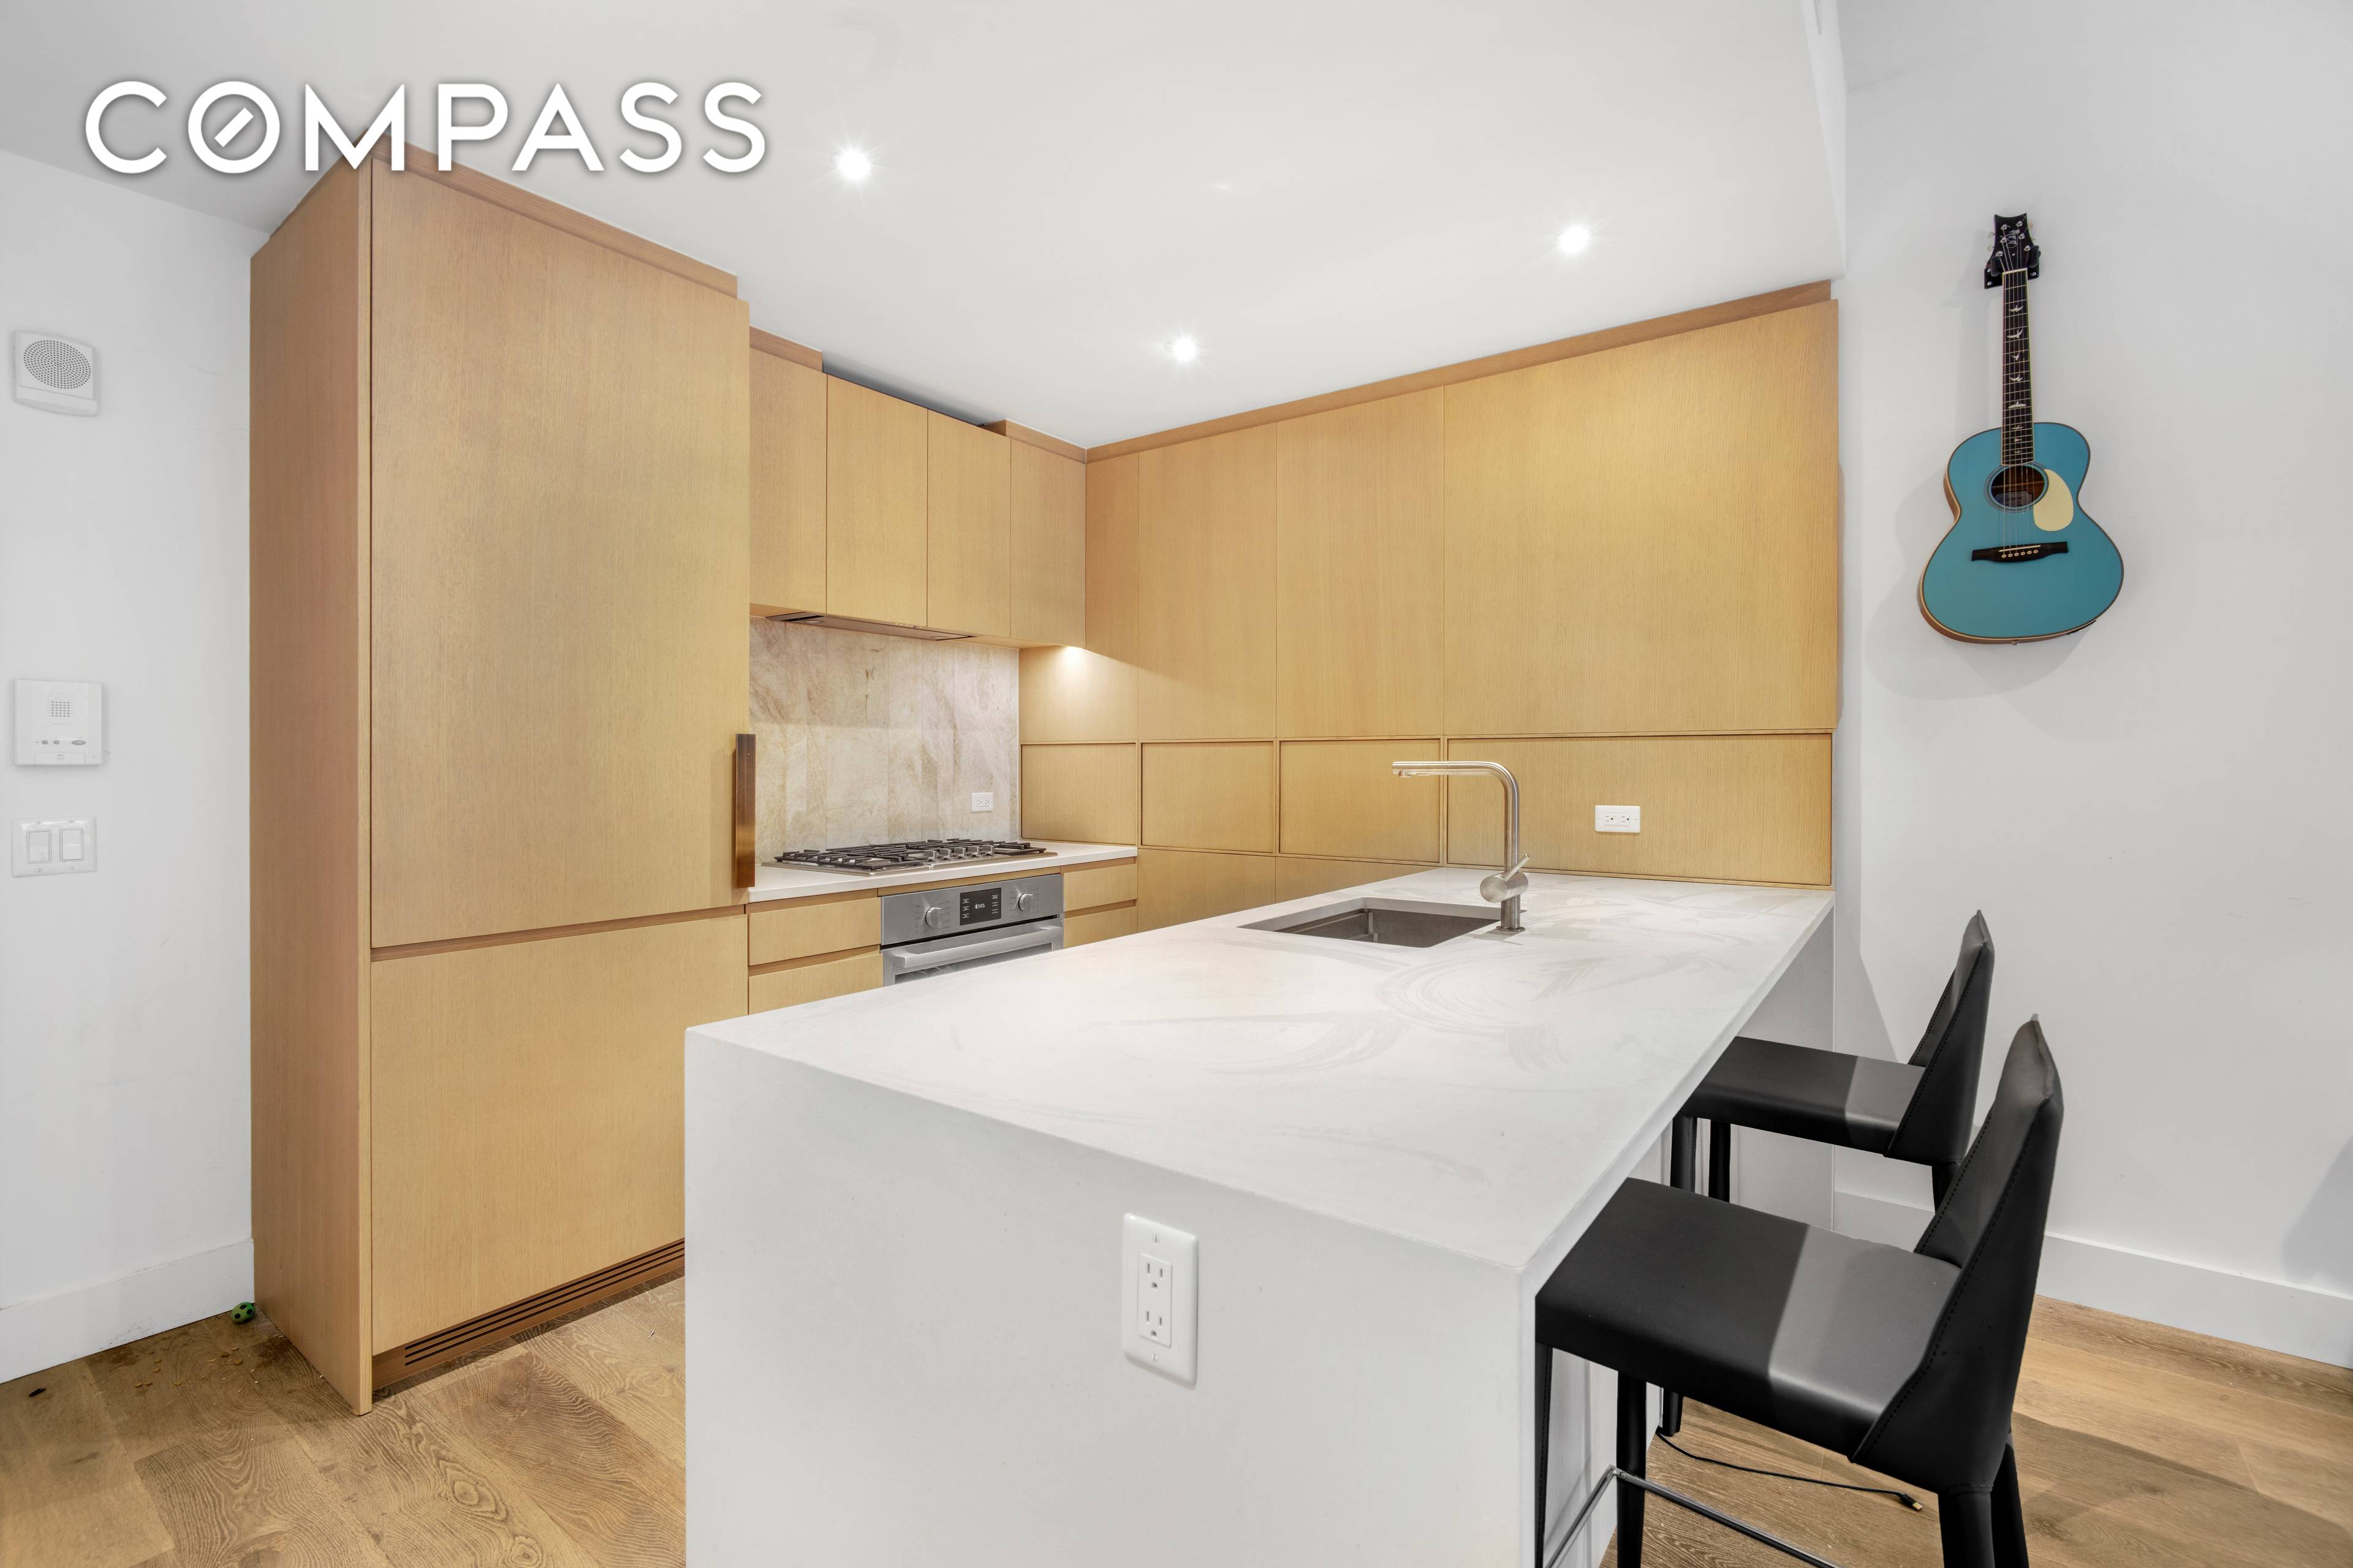 NEW LUXURY CONDO FOR SALE OR RENT Spacious Eastern facing one bedroom condo featuring an open kitchen, ample closets, wide plank oak flooring and a washer dryer.